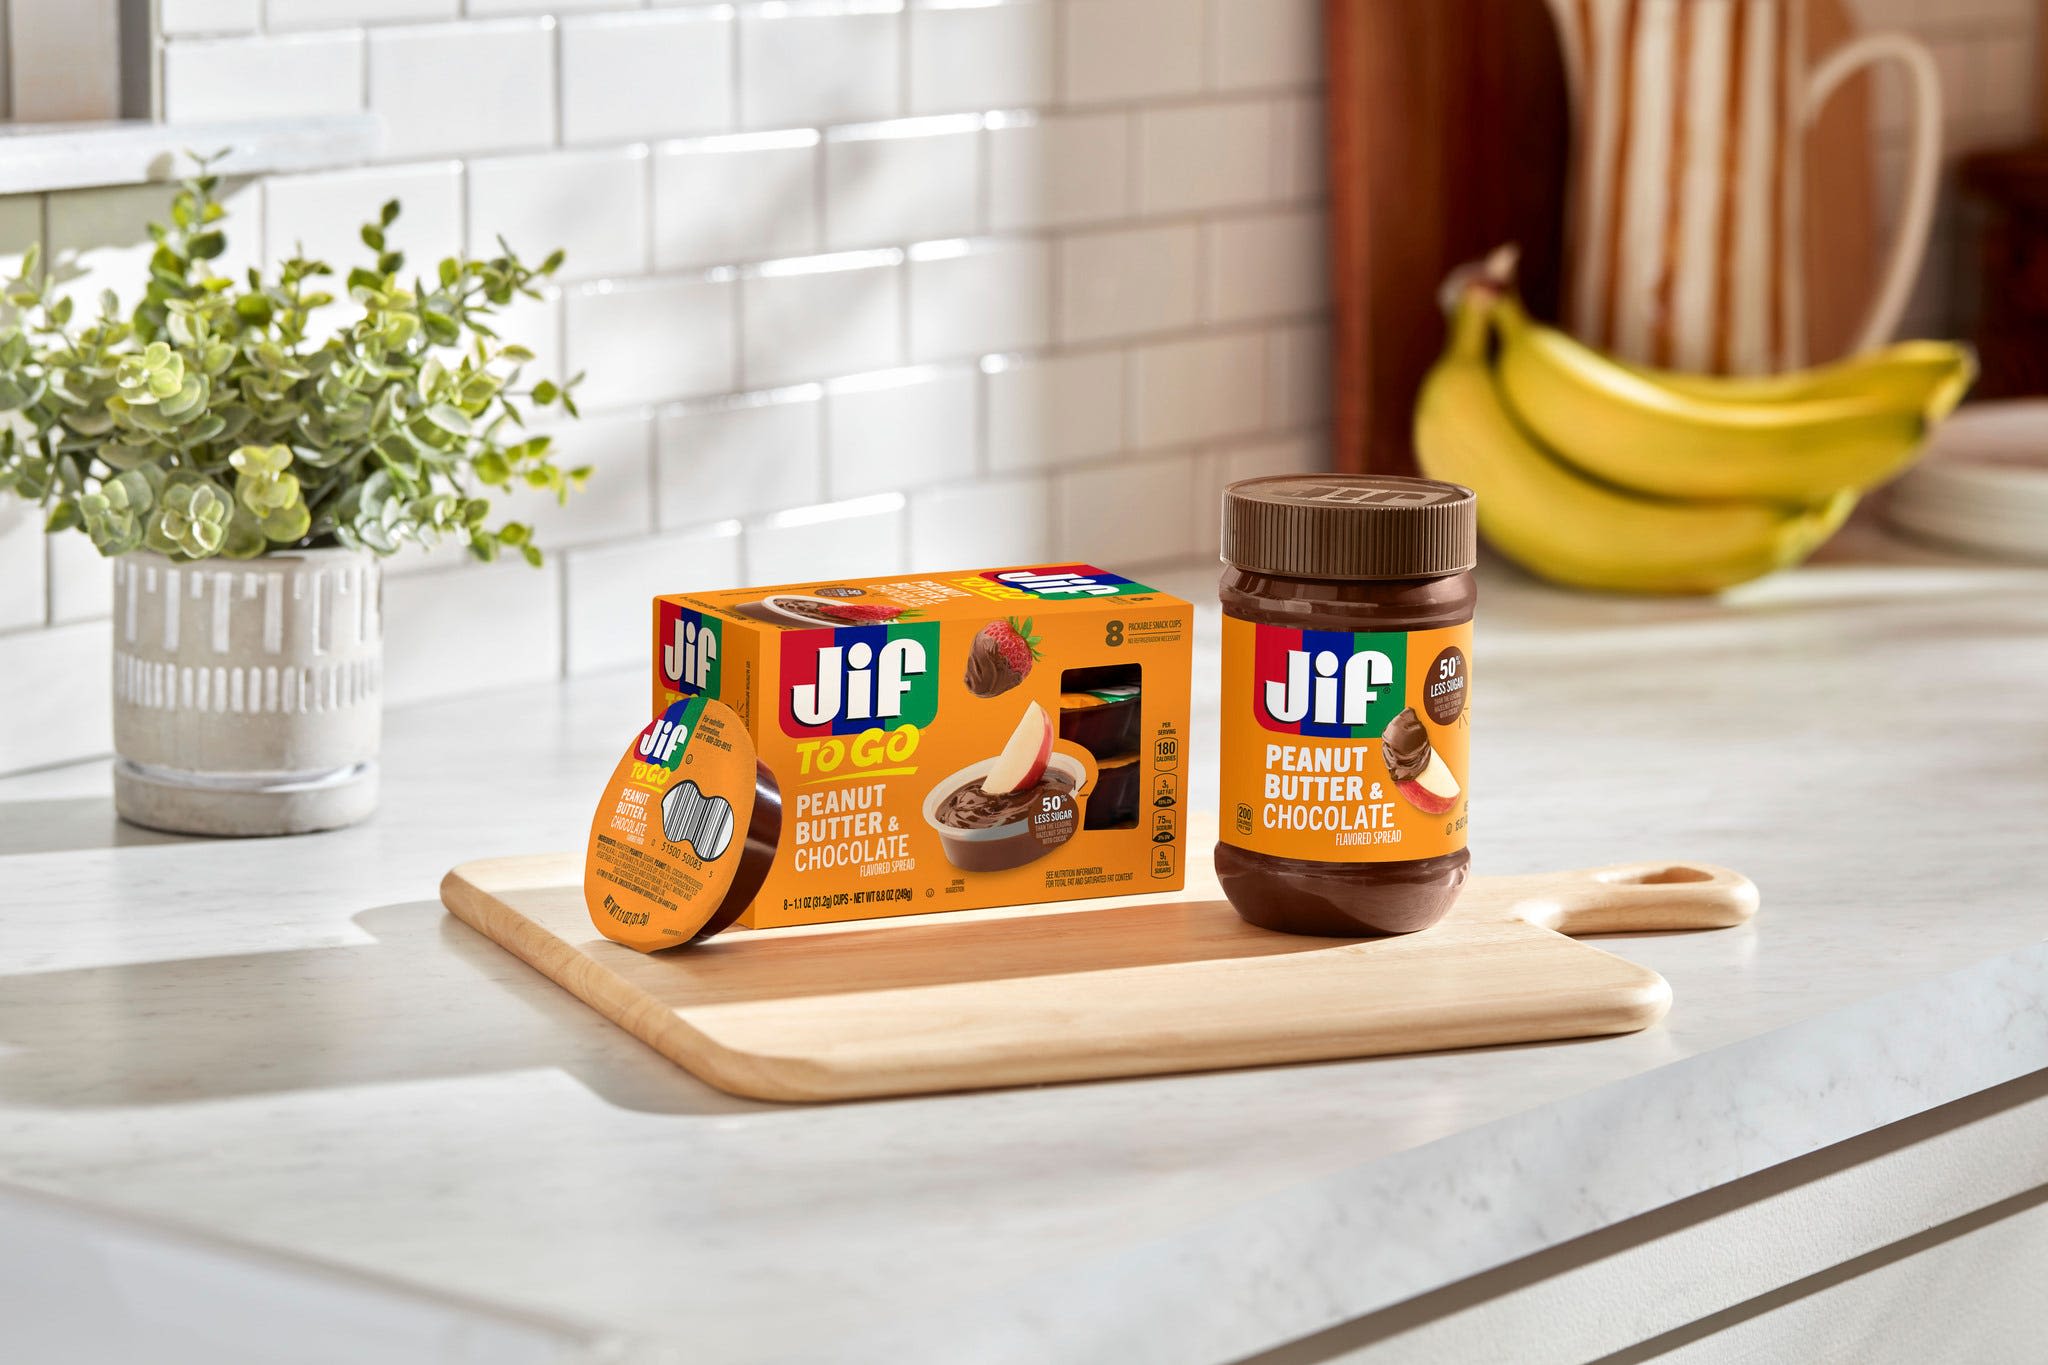 Peanut Butter and Chocolate fan? Jif's new spread is available at Amazon today